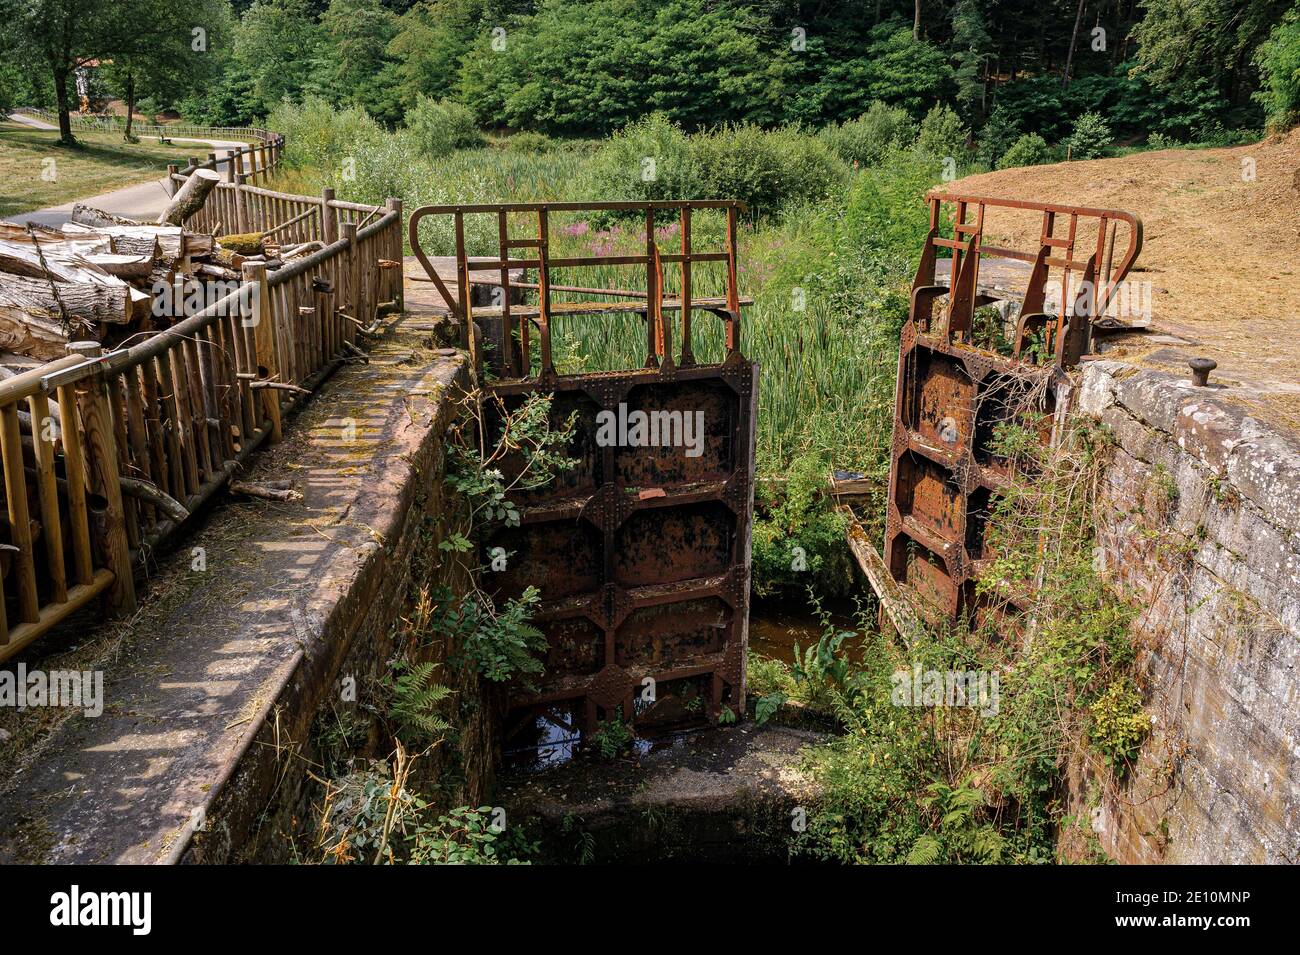 France. An abandoned canal in the Saverne area, An old rusty lock gate remains attached to the basin walls. Stock Photo